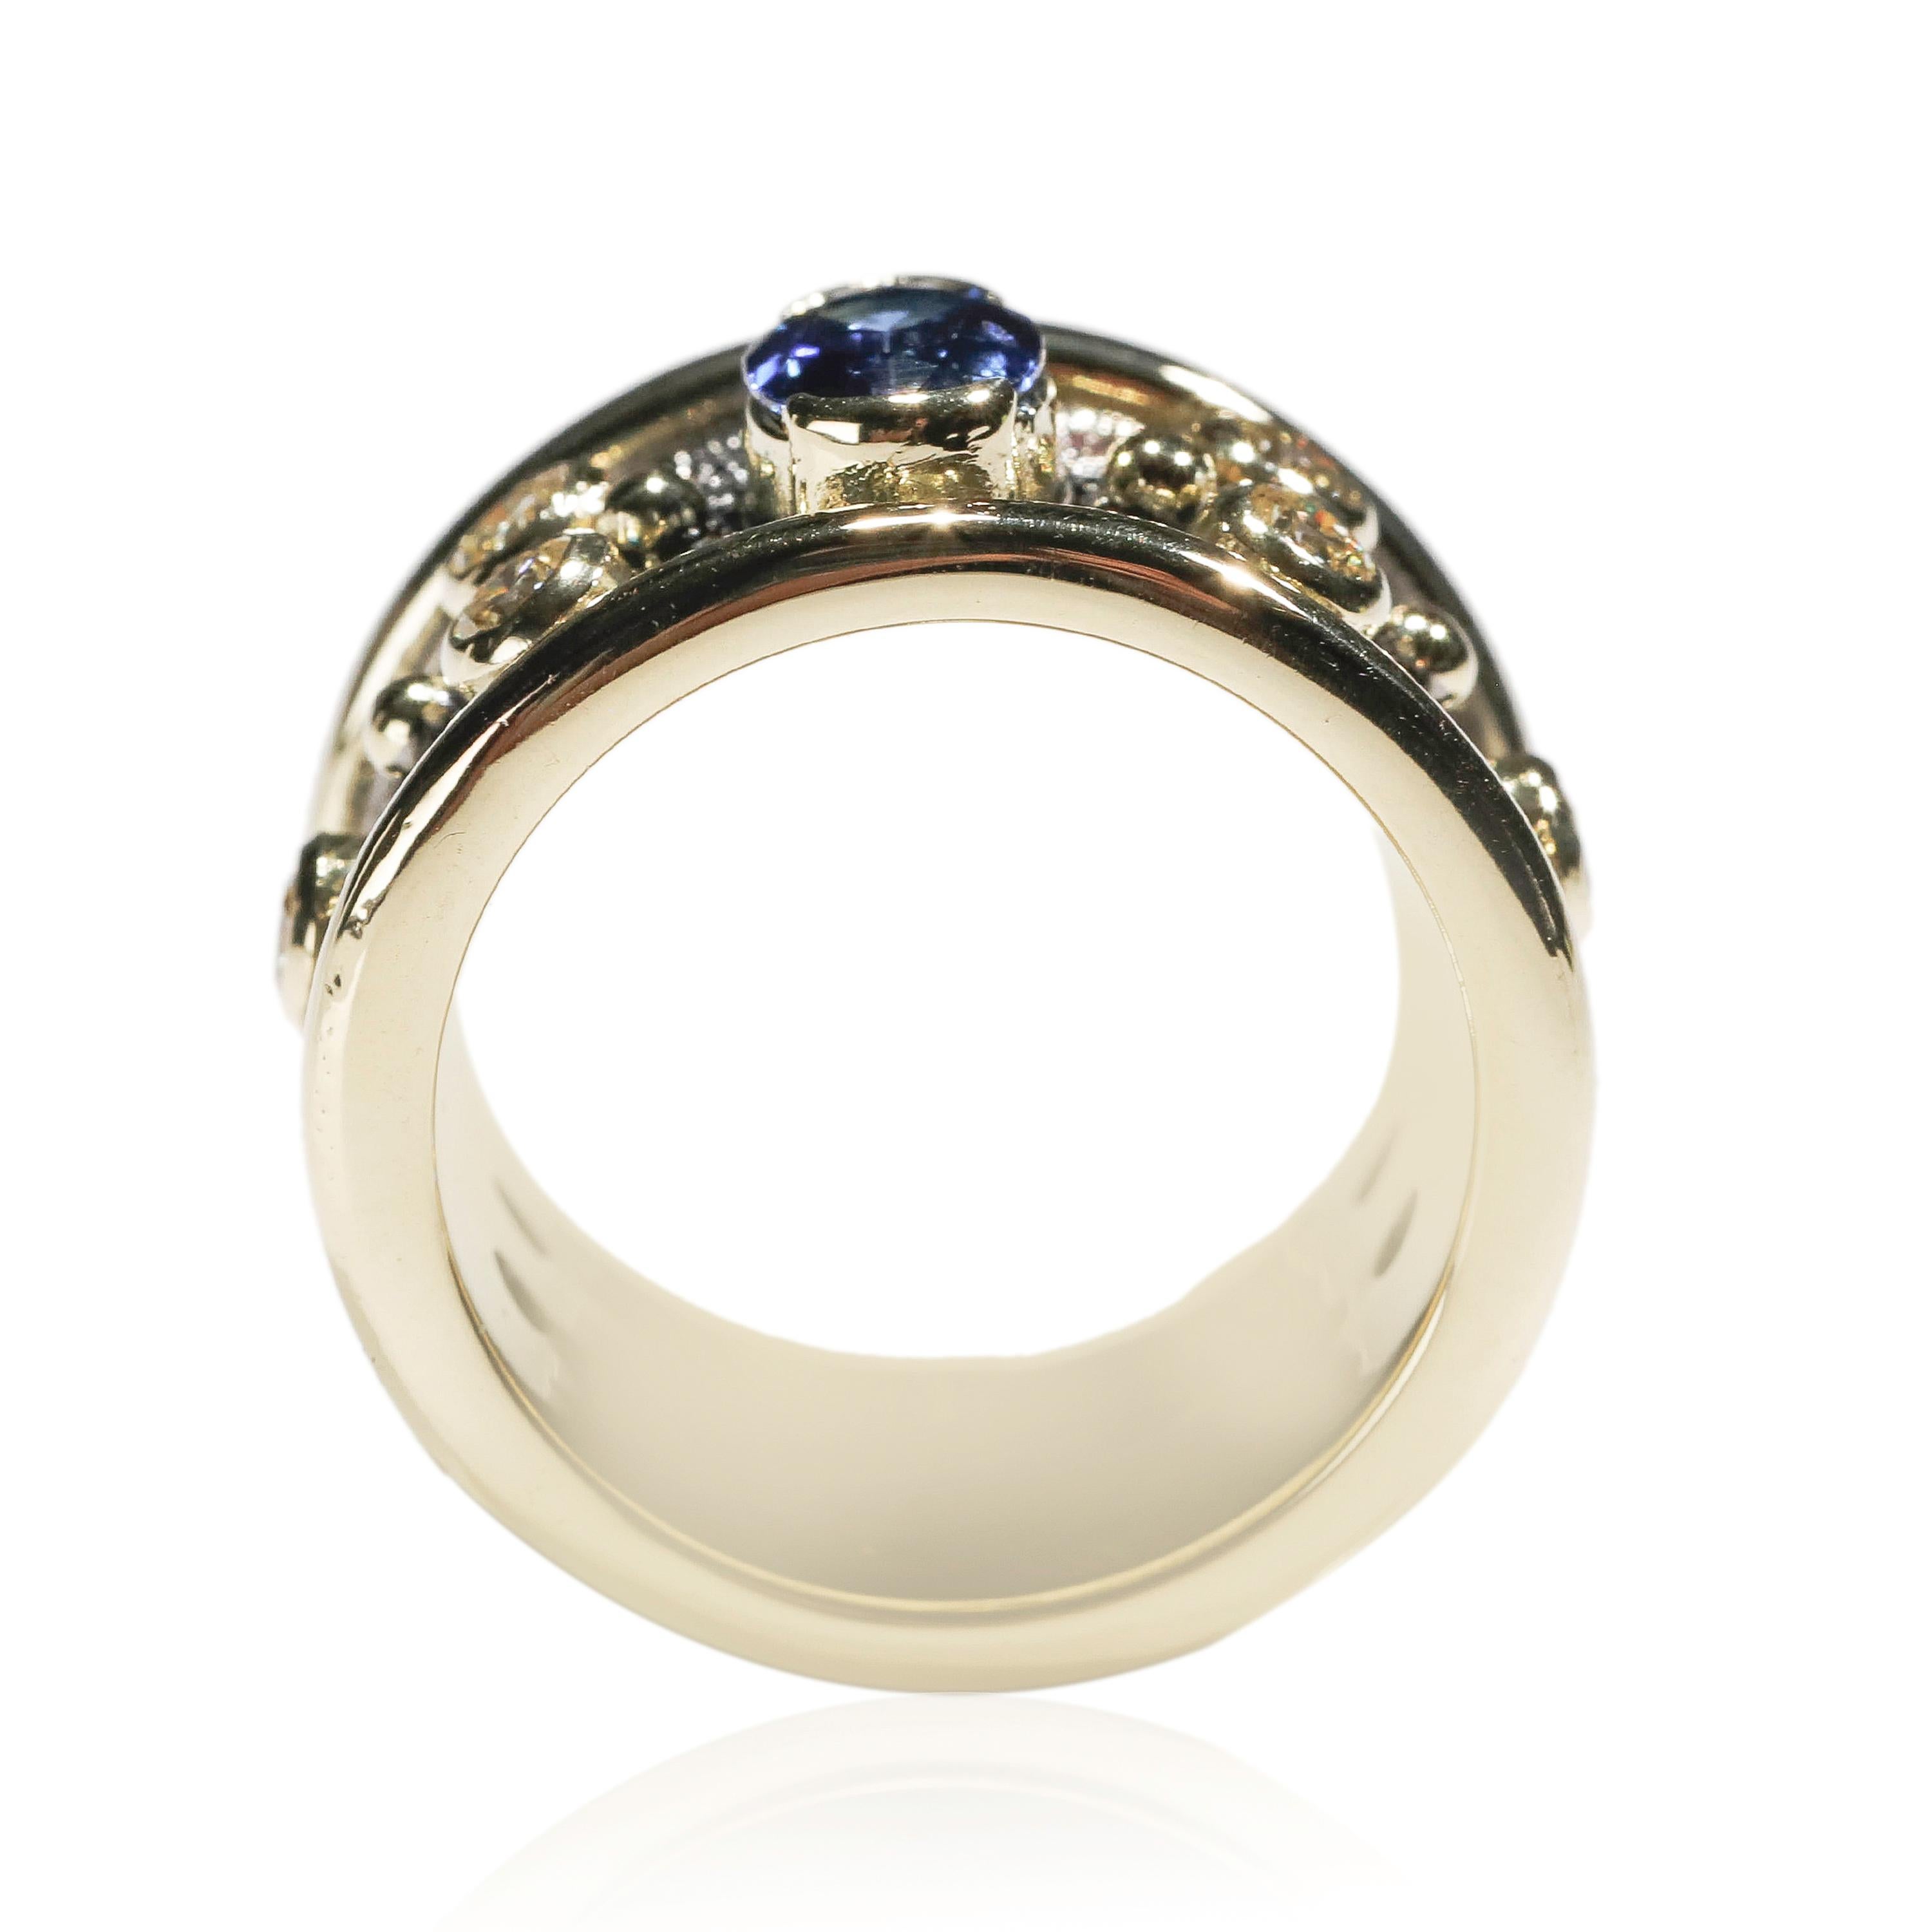 Oval Sapphire 1 Ct Diamond 18k Yellow Gold Cigar Band Ring US Size 8

Crafted in 18 kt Yellow Gold, this Unique design showcases a white Diamond 1 TCW Round-shaped diamonds, set in yellow gold, fine oval shape mesmerizing 0.5 ct sapphire, Polished